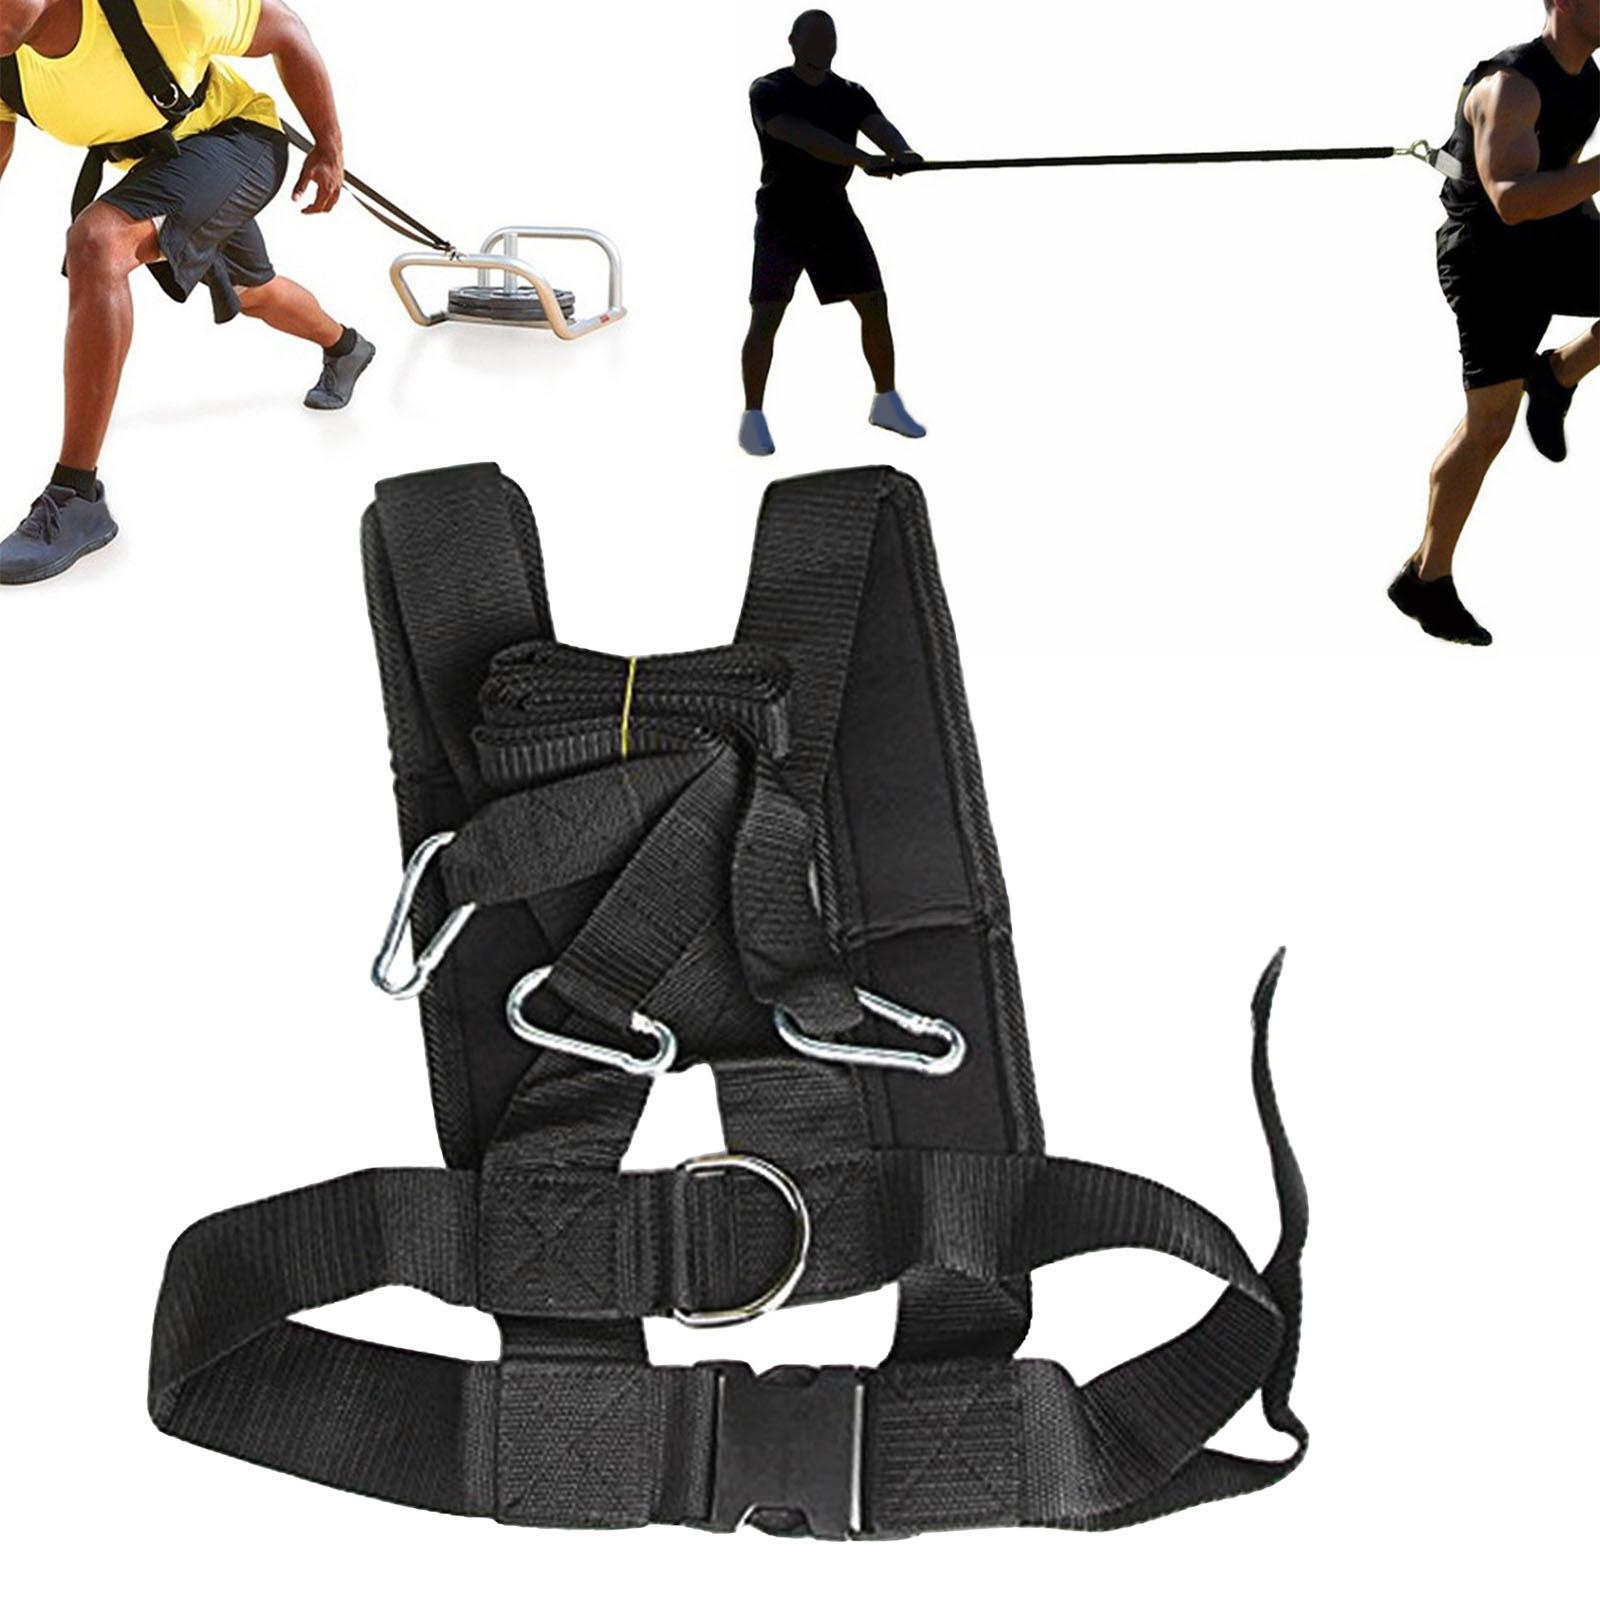 Harness Trainer Shoulder Strap Sled Weight Resistance Training for Football Strengthen